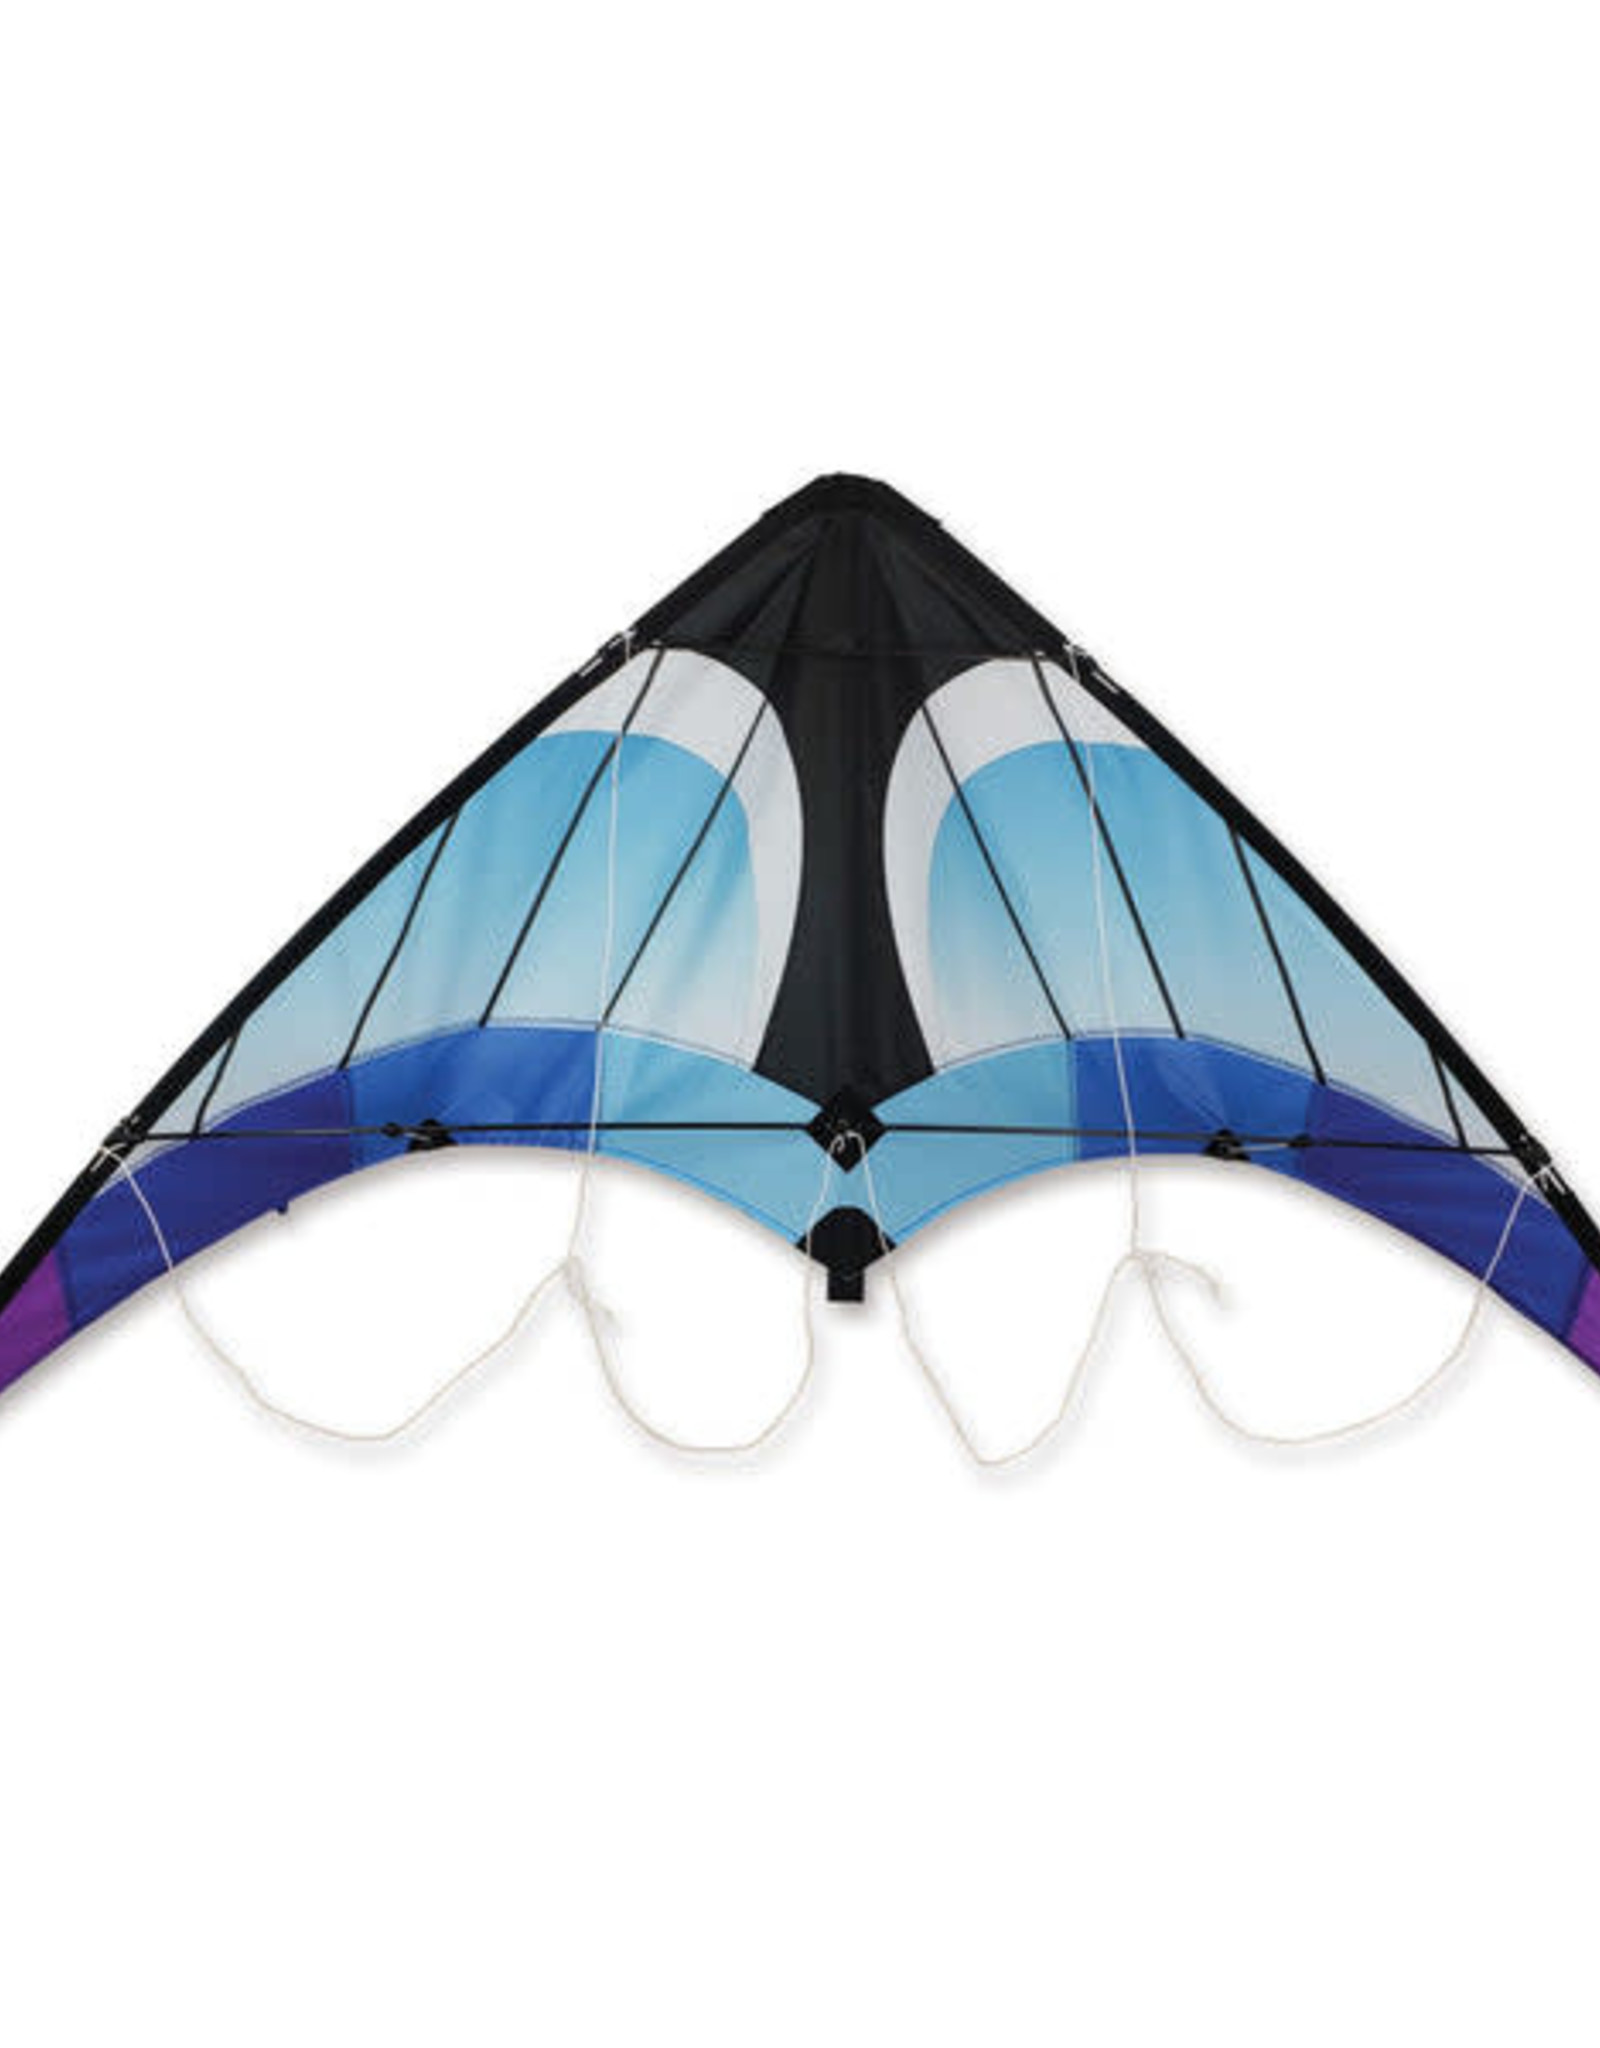 Premier Kites ZOOMER 2   - COOL *Not available for shipping. Pick up only.